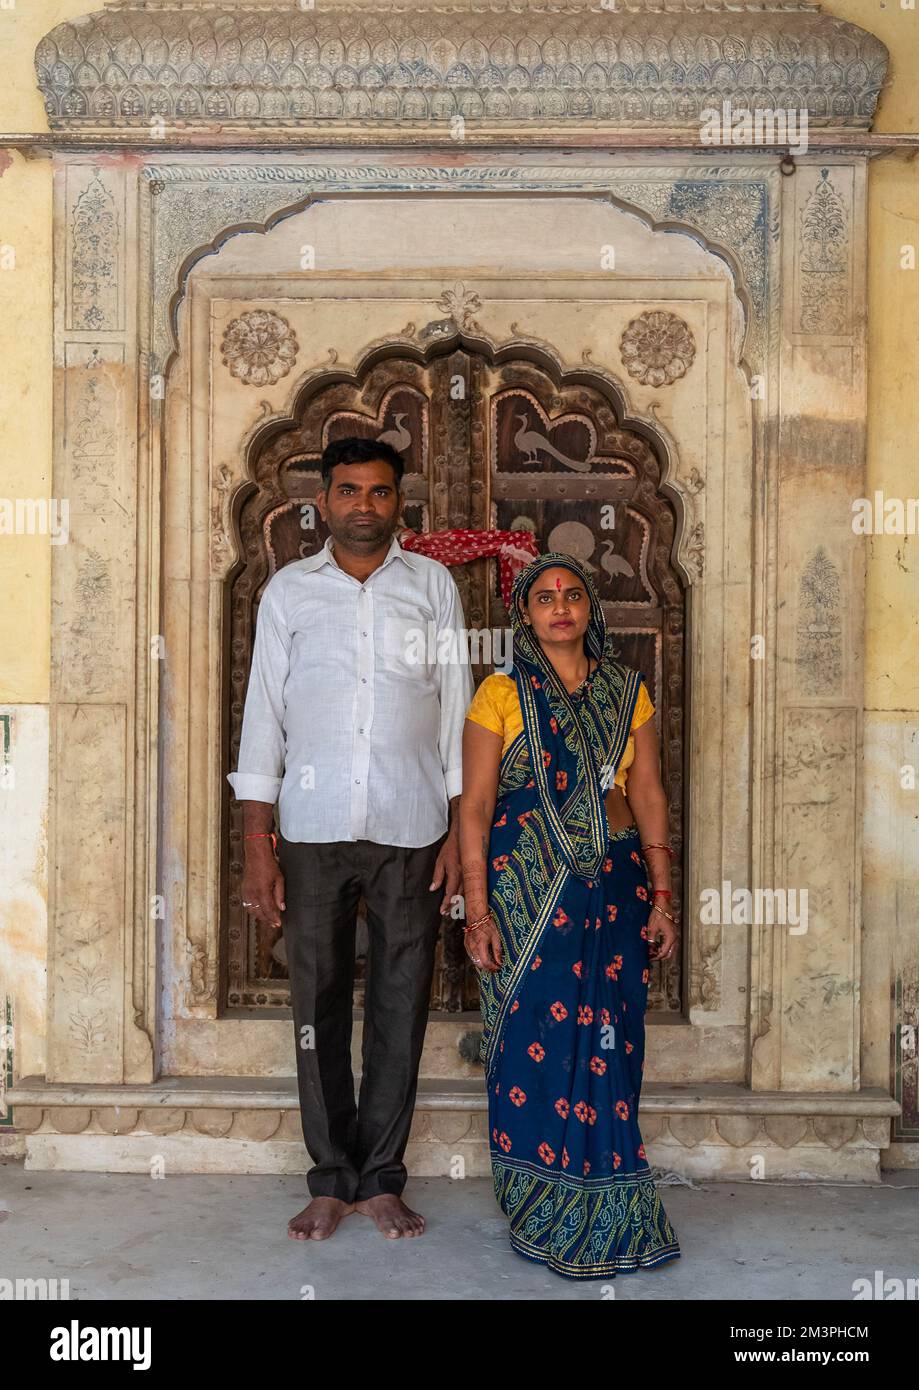 Portrait of a Rajasthani couple in Galtaji temple, Rajasthan, Jaipur, India Stock Photo